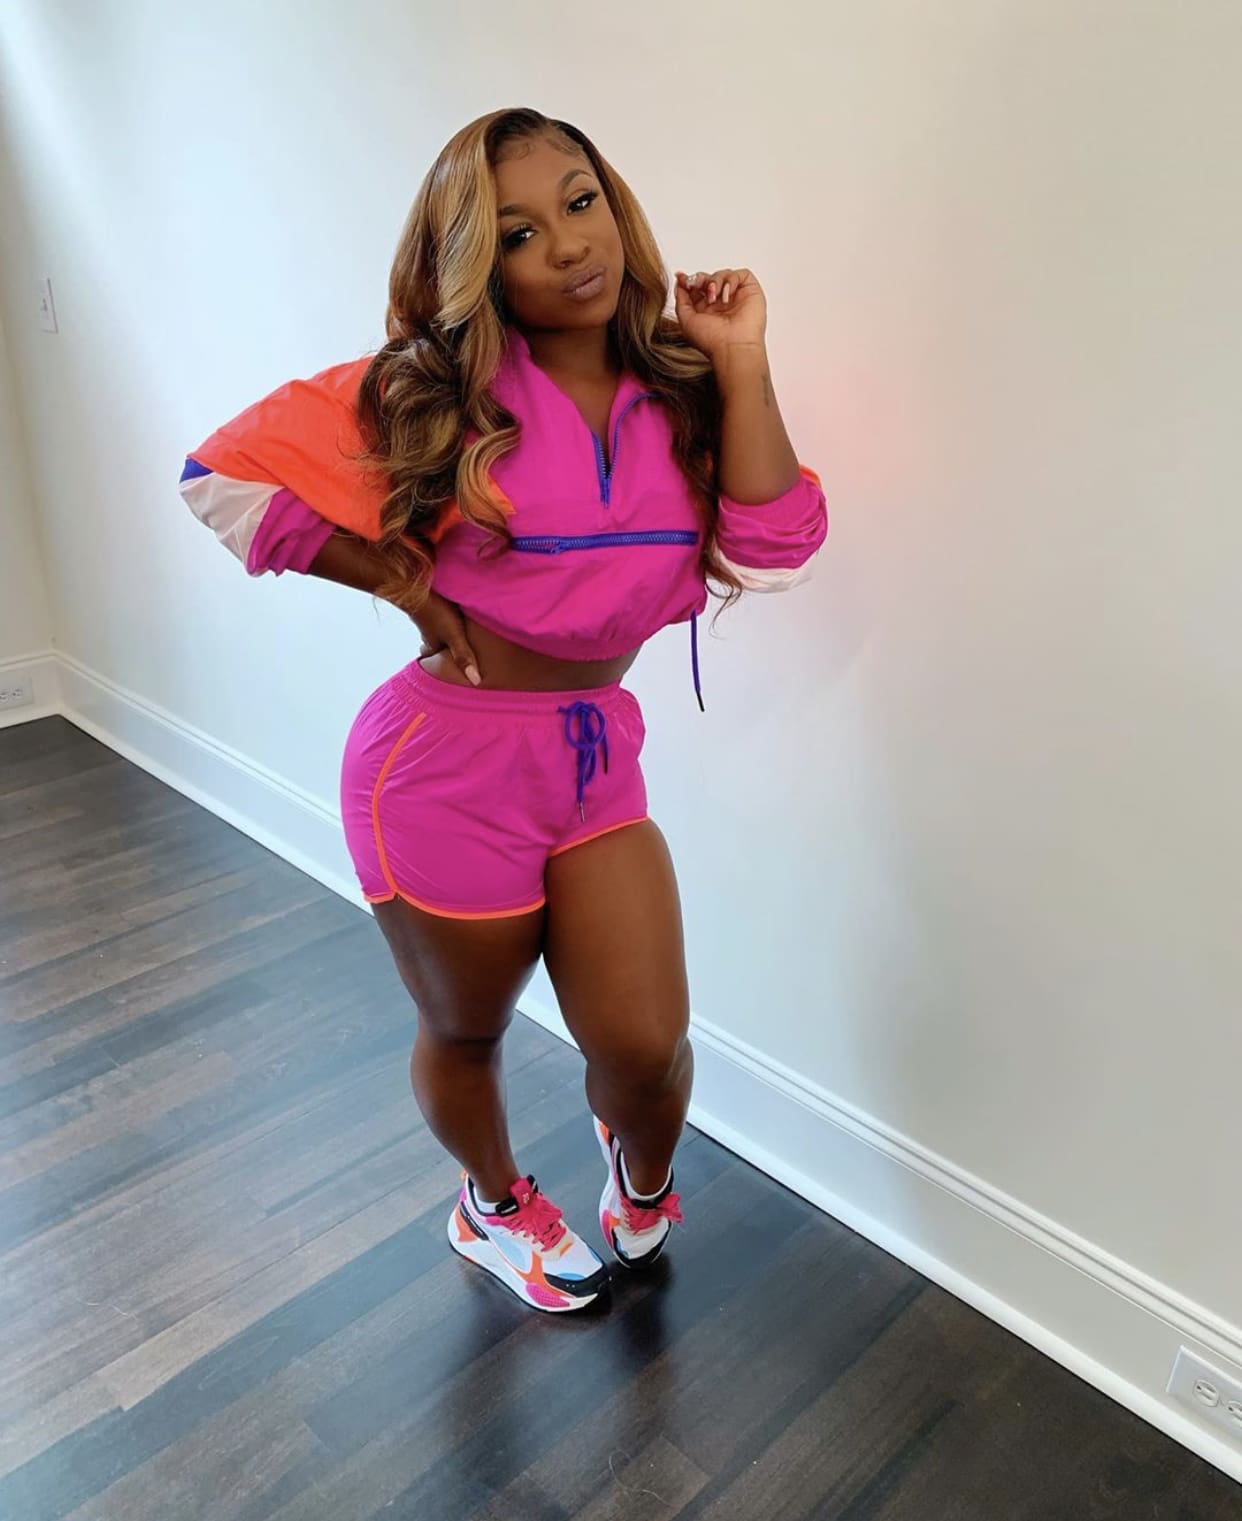 Toya Johnson's Daughter, Reginae Carter Is Happy That She'll 'Look 12 Years Old' Her Whole Life